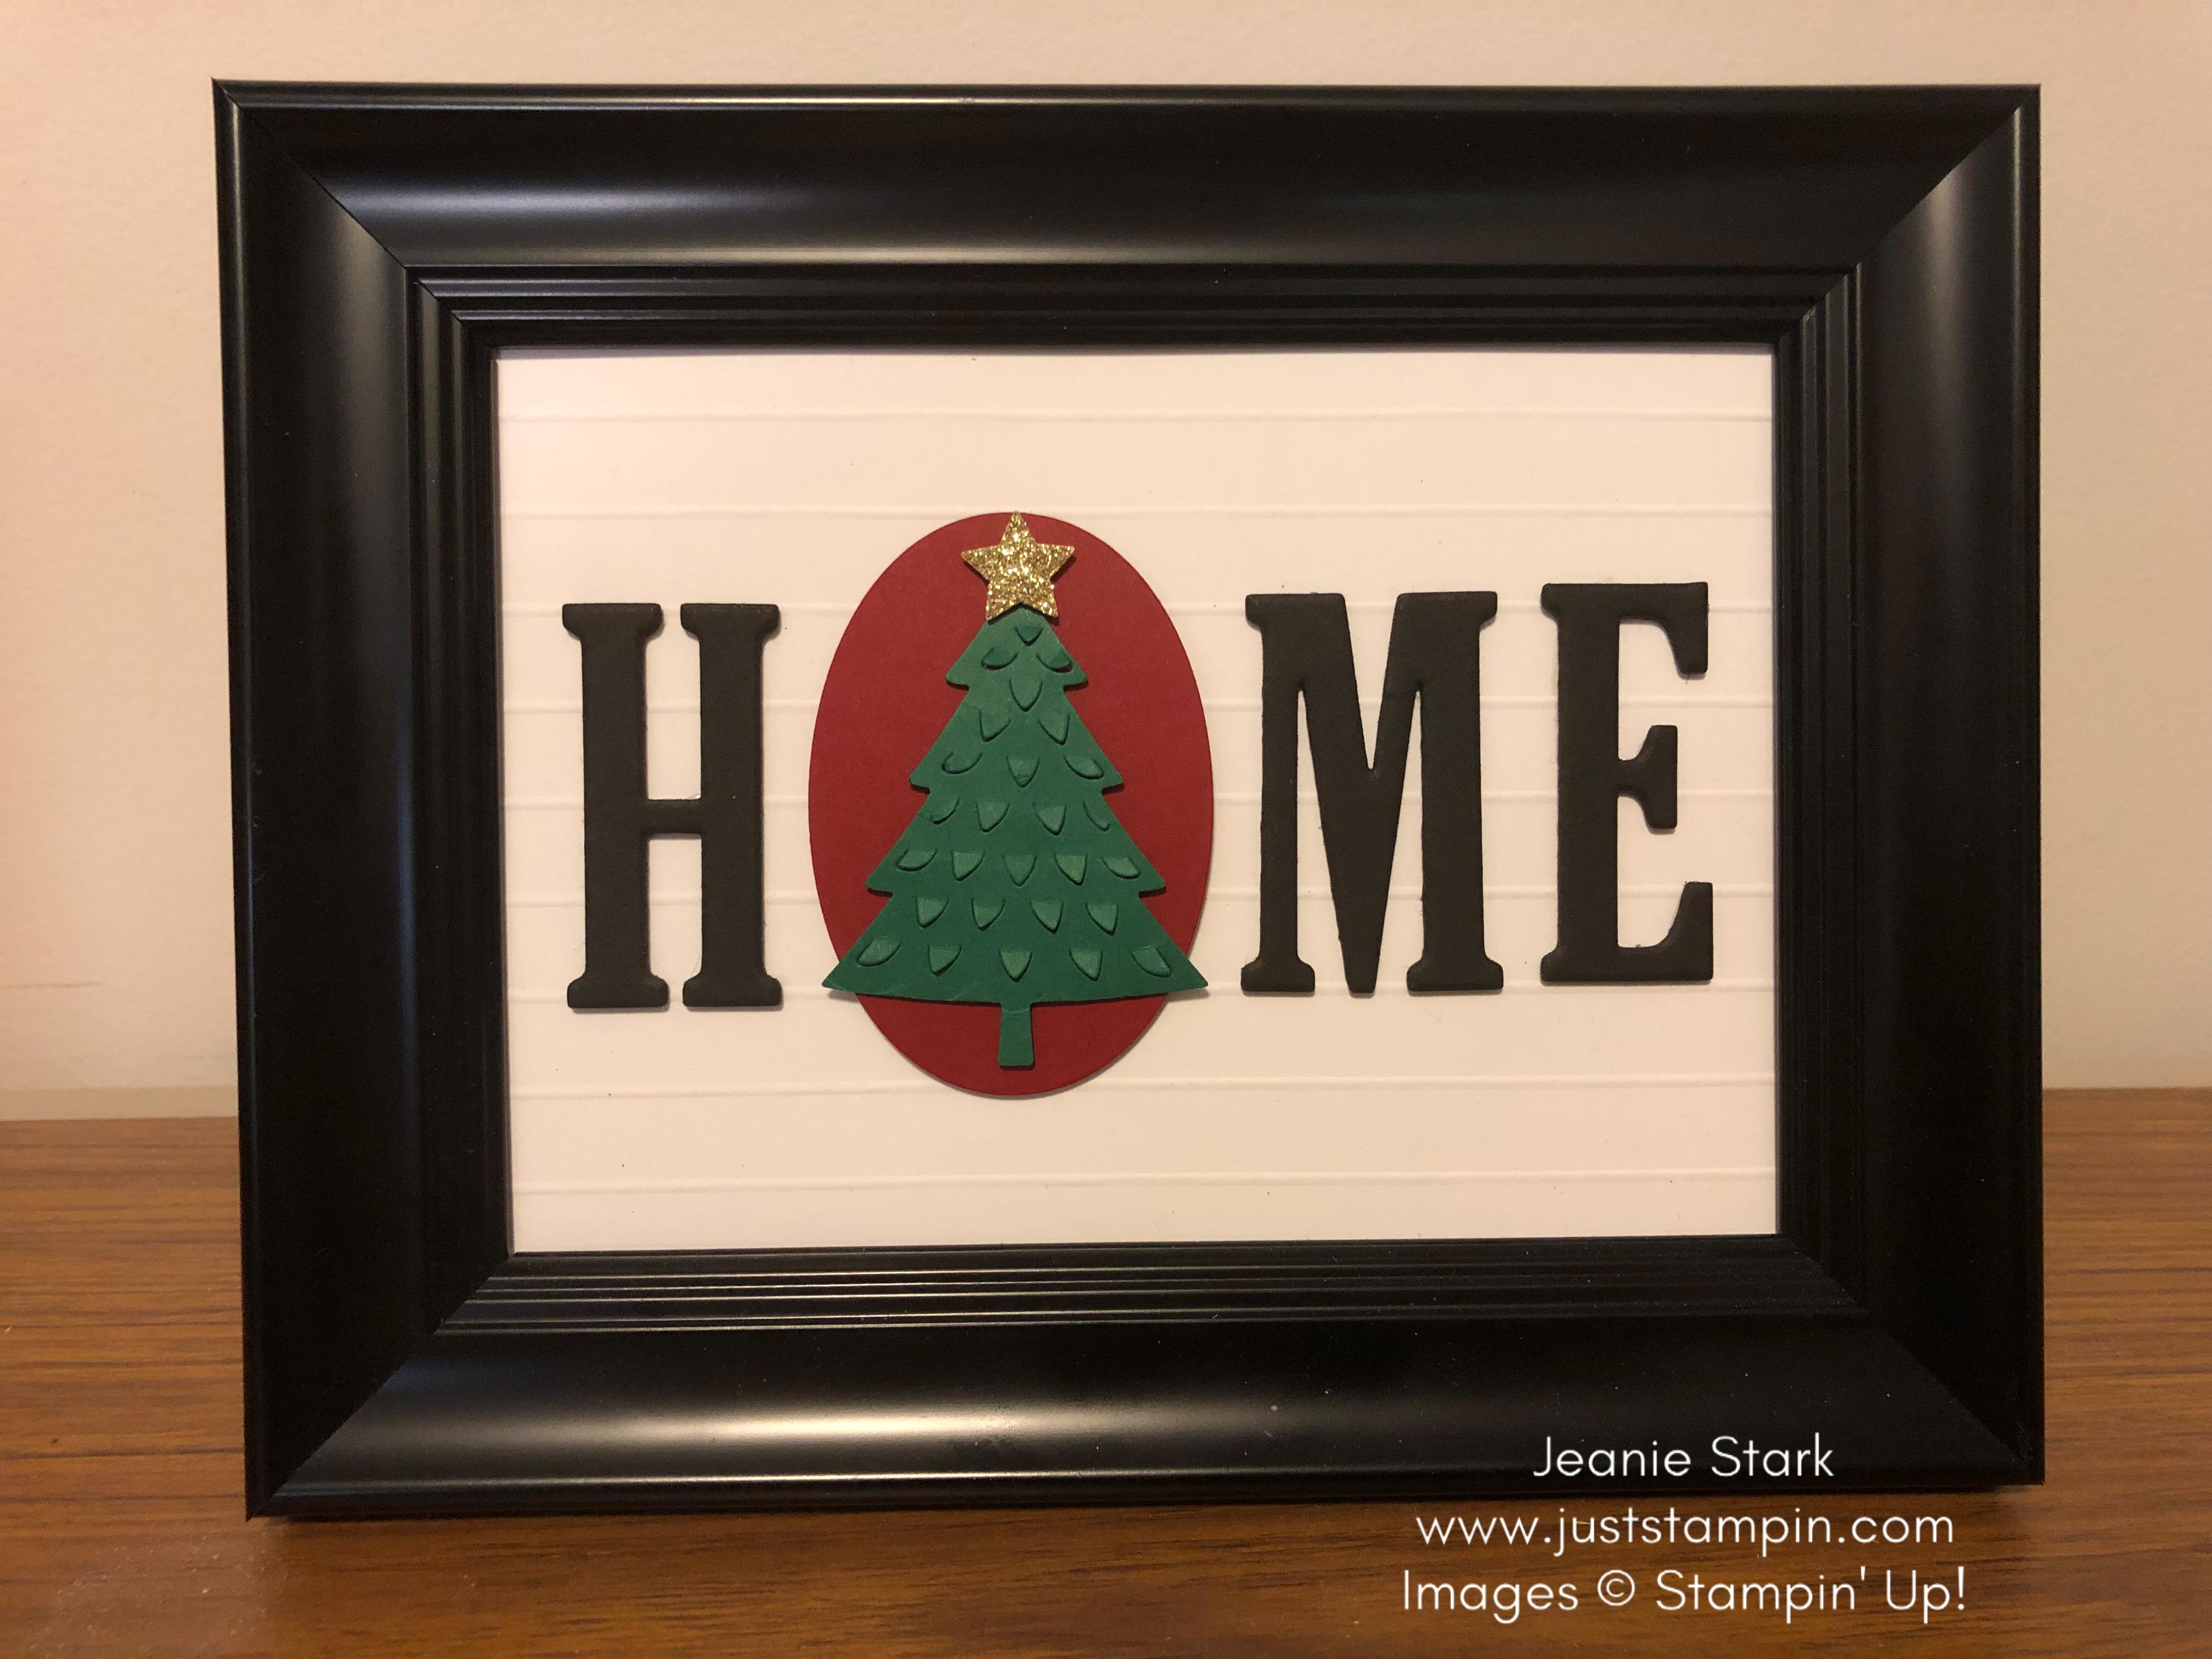 Stampin Up Large Letter Framelits Home decor project kit to go with interchangeable seasonal displays - Jeanie Stark StampinUp